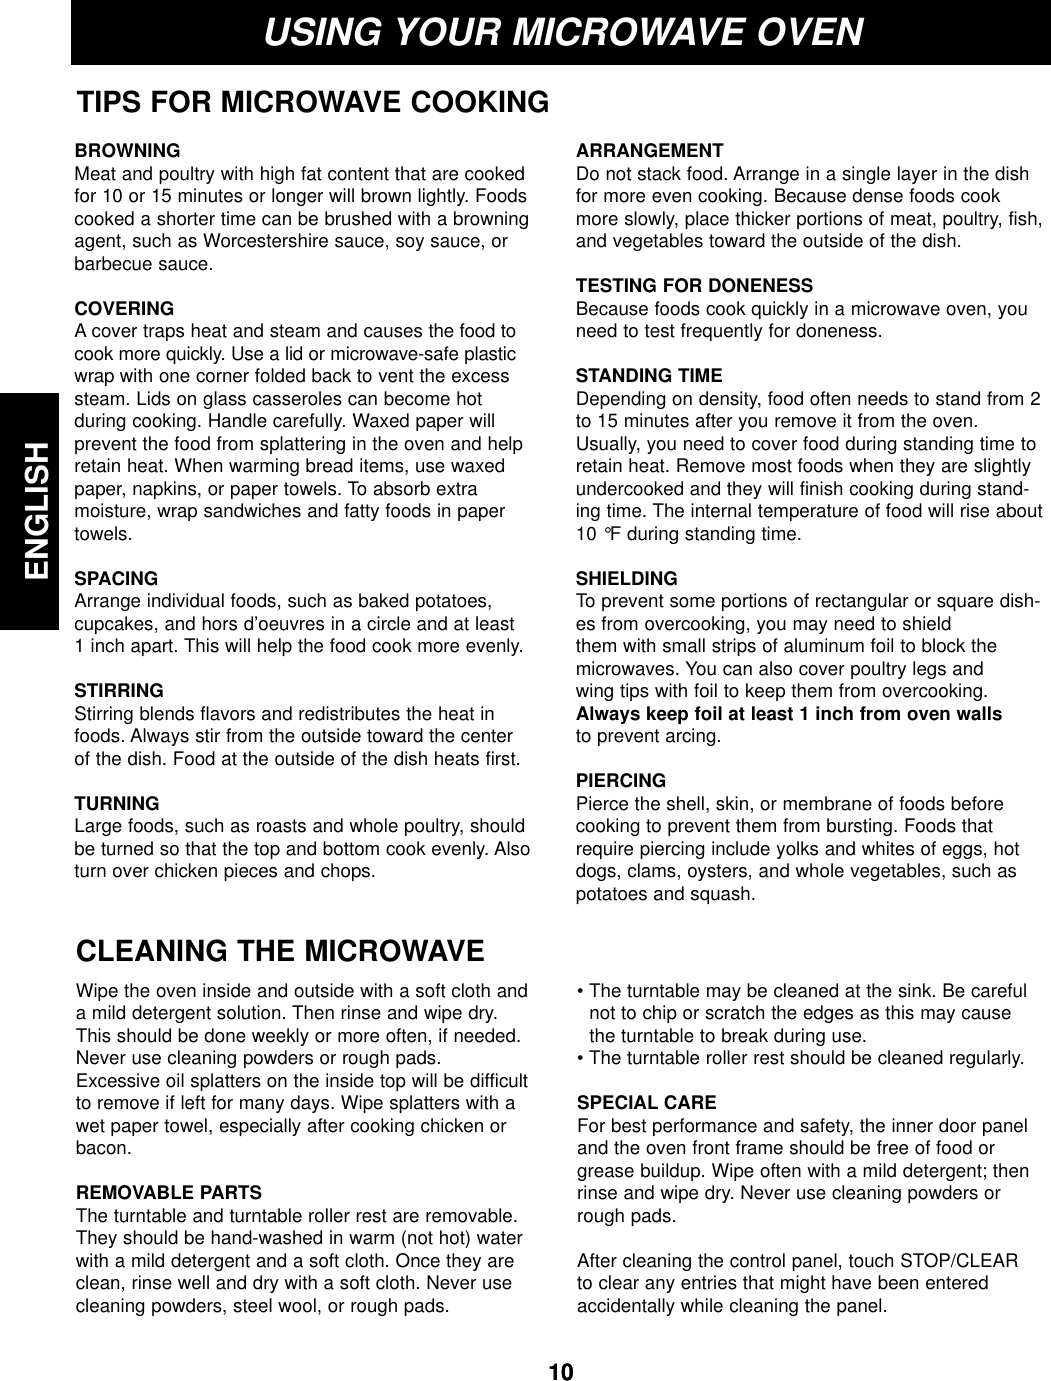 ENGLISH1010USING YOUR MICROWAVE OVENTIPS FOR MICROWAVE COOKINGBROWNINGMeat and poultry with high fat content that are cookedfor 10 or 15 minutes or longer will brown lightly. Foodscooked a shorter time can be brushed with a browningagent, such as Worcestershire sauce, soy sauce, orbarbecue sauce.COVERING A cover traps heat and steam and causes the food tocook more quickly. Use a lid or microwave-safe plasticwrap with one corner folded back to vent the excesssteam. Lids on glass casseroles can become hot during cooking. Handle carefully. Waxed paper will prevent the food from splattering in the oven and helpretain heat. When warming bread items, use waxedpaper, napkins, or paper towels. To absorb extra moisture, wrap sandwiches and fatty foods in papertowels.SPACINGArrange individual foods, such as baked potatoes, cupcakes, and hors d’oeuvres in a circle and at least 1 inch apart. This will help the food cook more evenly.STIRRING Stirring blends flavors and redistributes the heat infoods. Always stir from the outside toward the center of the dish. Food at the outside of the dish heats first.TURNINGLarge foods, such as roasts and whole poultry, shouldbe turned so that the top and bottom cook evenly. Alsoturn over chicken pieces and chops.ARRANGEMENTDo not stack food. Arrange in a single layer in the dishfor more even cooking. Because dense foods cookmore slowly, place thicker portions of meat, poultry, fish,and vegetables toward the outside of the dish.TESTING FOR DONENESS Because foods cook quickly in a microwave oven, youneed to test frequently for doneness.STANDING TIME Depending on density, food often needs to stand from 2to 15 minutes after you remove it from the oven.Usually, you need to cover food during standing time toretain heat. Remove most foods when they are slightlyundercooked and they will finish cooking during stand-ing time. The internal temperature of food will rise about10 °F during standing time.SHIELDING To prevent some portions of rectangular or square dish-es from overcooking, you may need to shield them with small strips of aluminum foil to block themicrowaves. You can also cover poultry legs and wing tips with foil to keep them from overcooking.Always keep foil at least 1 inch from oven wallsto prevent arcing.PIERCING Pierce the shell, skin, or membrane of foods beforecooking to prevent them from bursting. Foods thatrequire piercing include yolks and whites of eggs, hotdogs, clams, oysters, and whole vegetables, such aspotatoes and squash.CLEANING THE MICROWAVEWipe the oven inside and outside with a soft cloth anda mild detergent solution. Then rinse and wipe dry.This should be done weekly or more often, if needed.Never use cleaning powders or rough pads.Excessive oil splatters on the inside top will be difficultto remove if left for many days. Wipe splatters with awet paper towel, especially after cooking chicken orbacon.REMOVABLE PARTSThe turntable and turntable roller rest are removable.They should be hand-washed in warm (not hot) waterwith a mild detergent and a soft cloth. Once they areclean, rinse well and dry with a soft cloth. Never usecleaning powders, steel wool, or rough pads.• The turntable may be cleaned at the sink. Be carefulnot to chip or scratch the edges as this may causethe turntable to break during use.• The turntable roller rest should be cleaned regularly.SPECIAL CAREFor best performance and safety, the inner door paneland the oven front frame should be free of food orgrease buildup. Wipe often with a mild detergent; thenrinse and wipe dry. Never use cleaning powders orrough pads.After cleaning the control panel, touch STOP/CLEARto clear any entries that might have been enteredaccidentally while cleaning the panel.